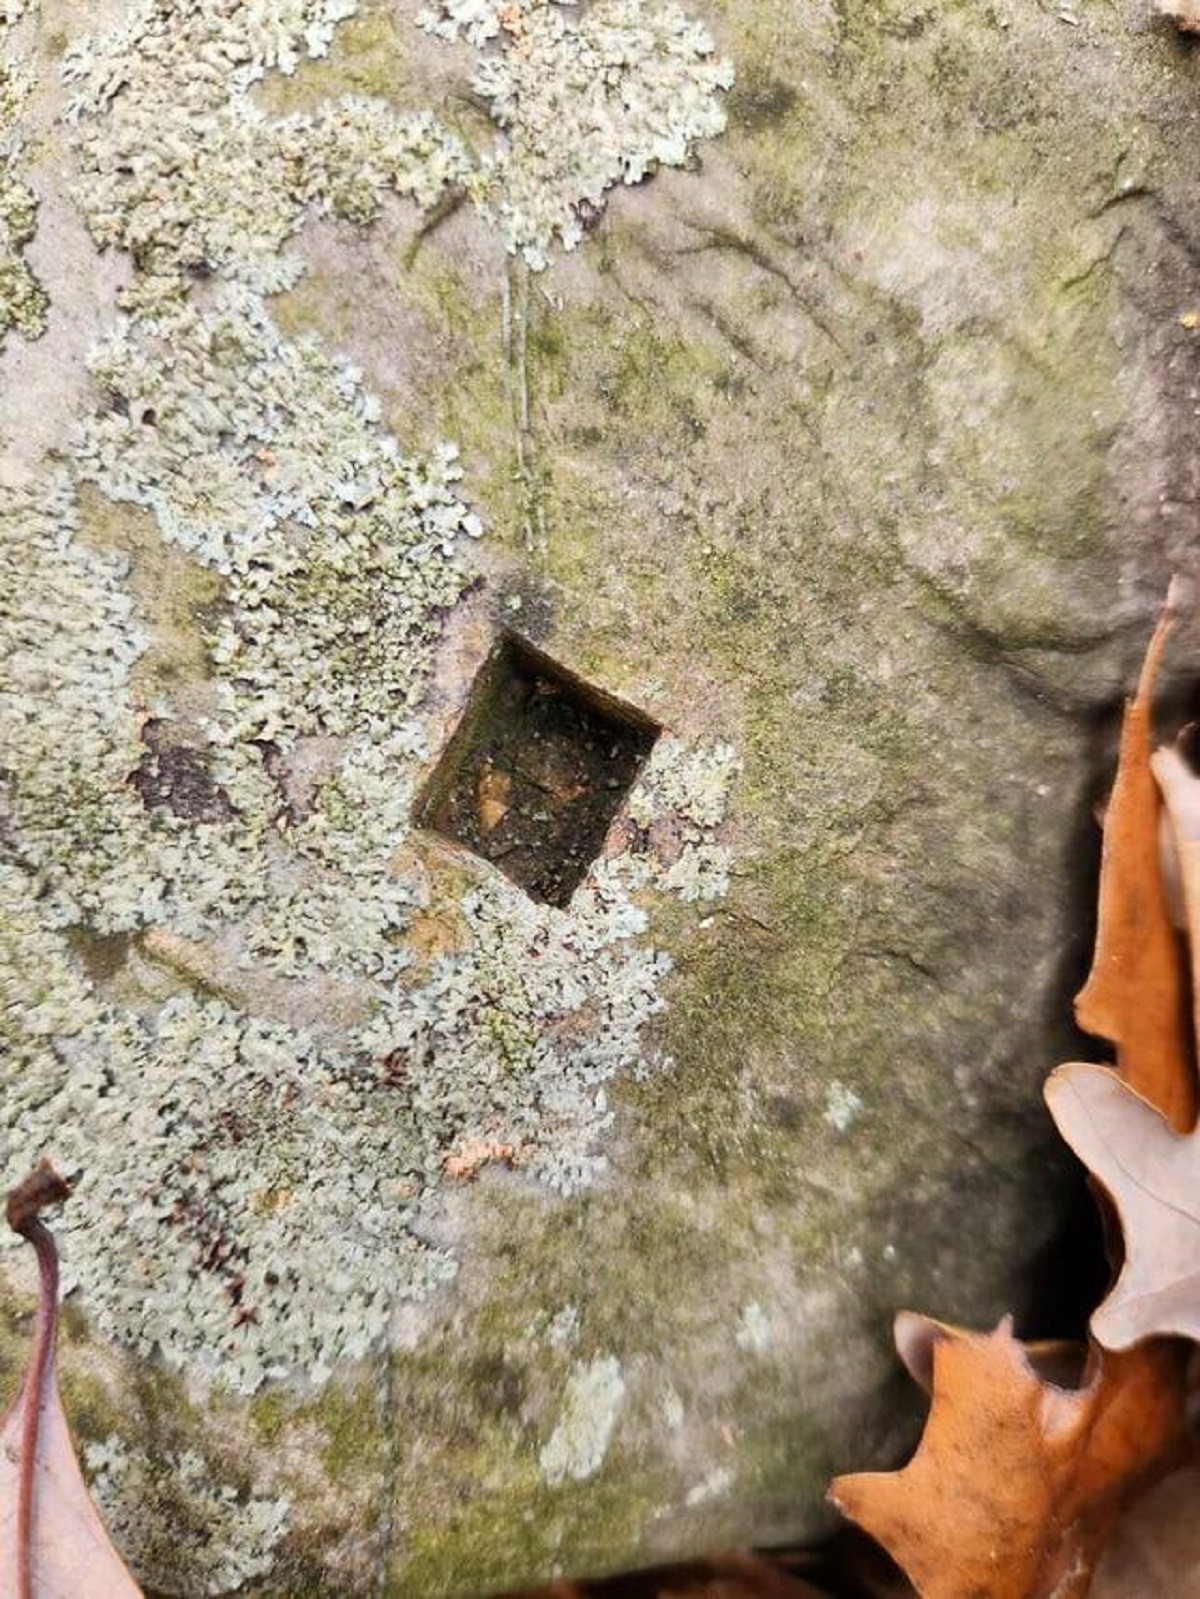 "A square hole in a rock in the middle of the woods."